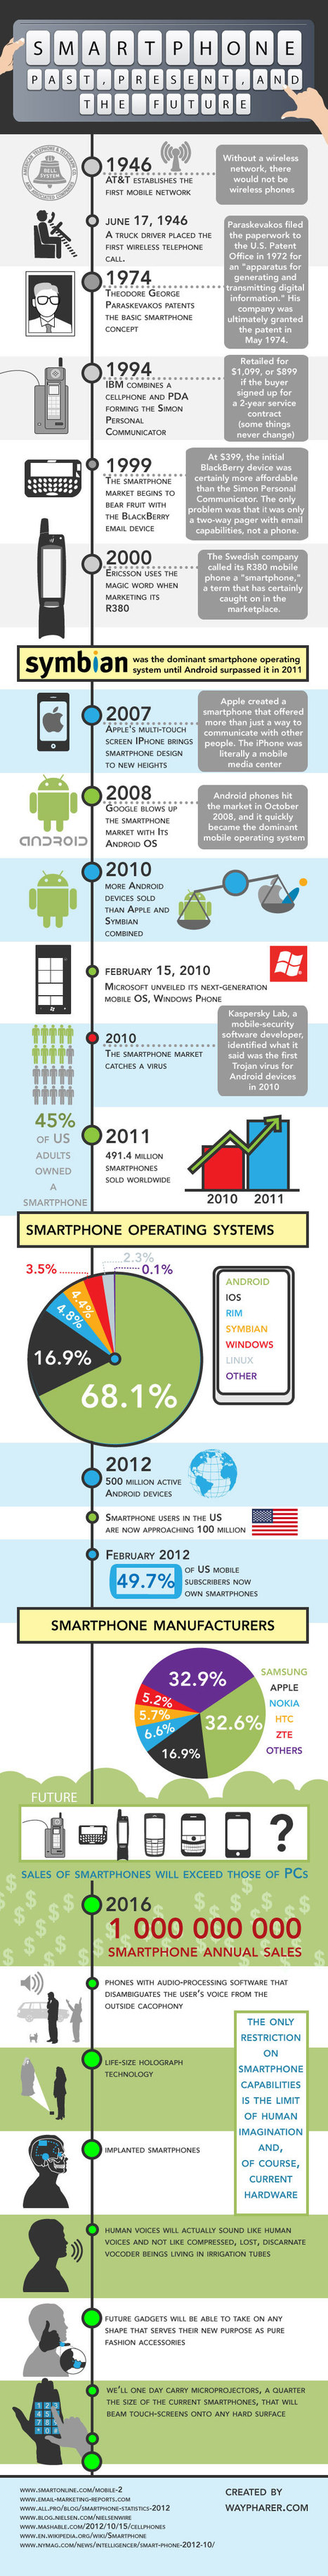 The Past, Present, And Potentially Amazing Future Of Smartphones [Infographic] | 21st Century Learning and Teaching | Scoop.it